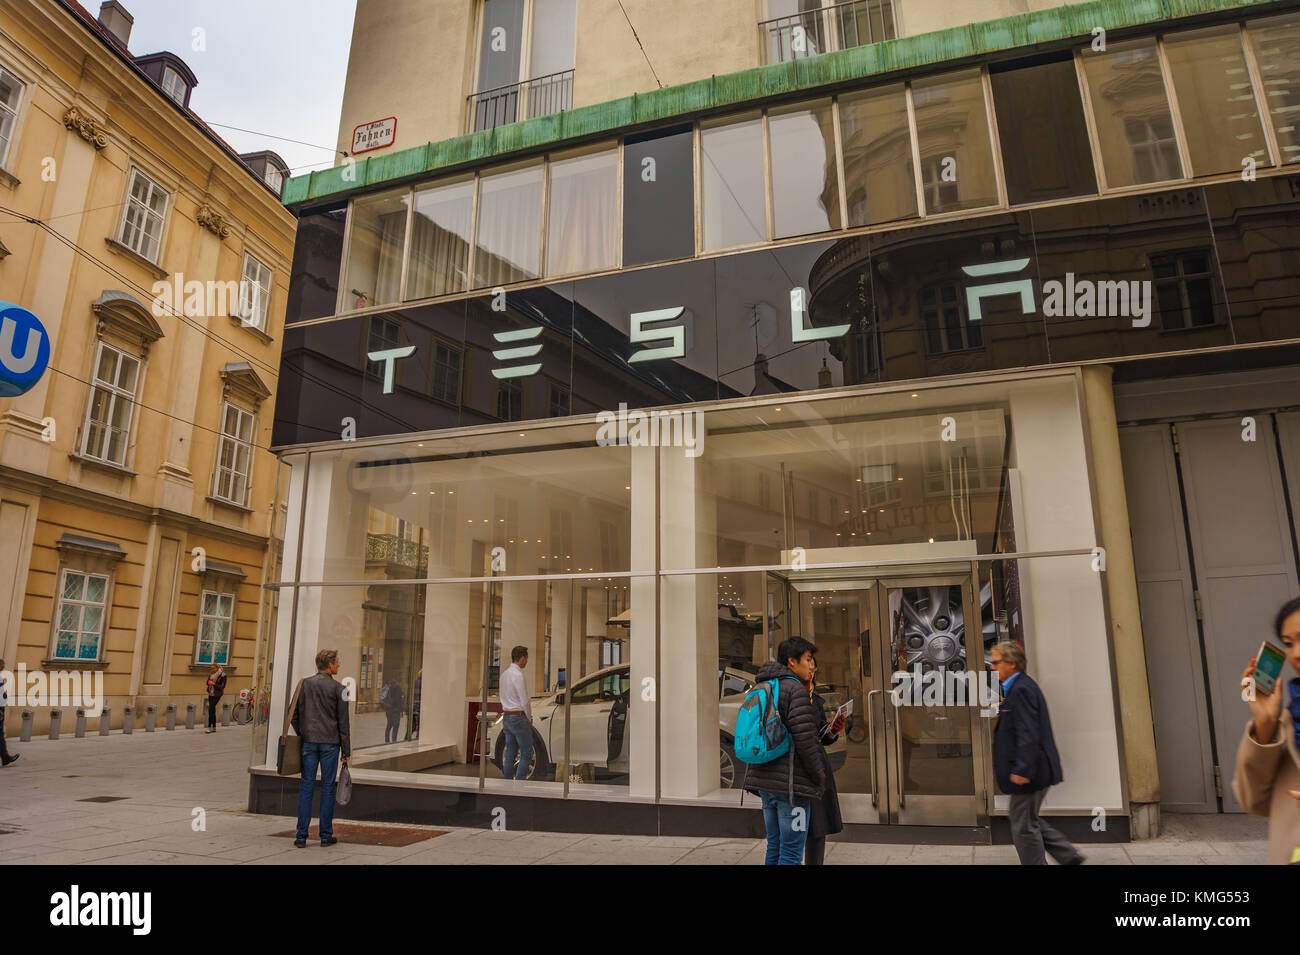 The new Tesla store in Vienna, Austria. Tesla model x and model s are exhibited in the center of Vienna city, near Grabenstrasse. Vienna, Austria. Stock Photo